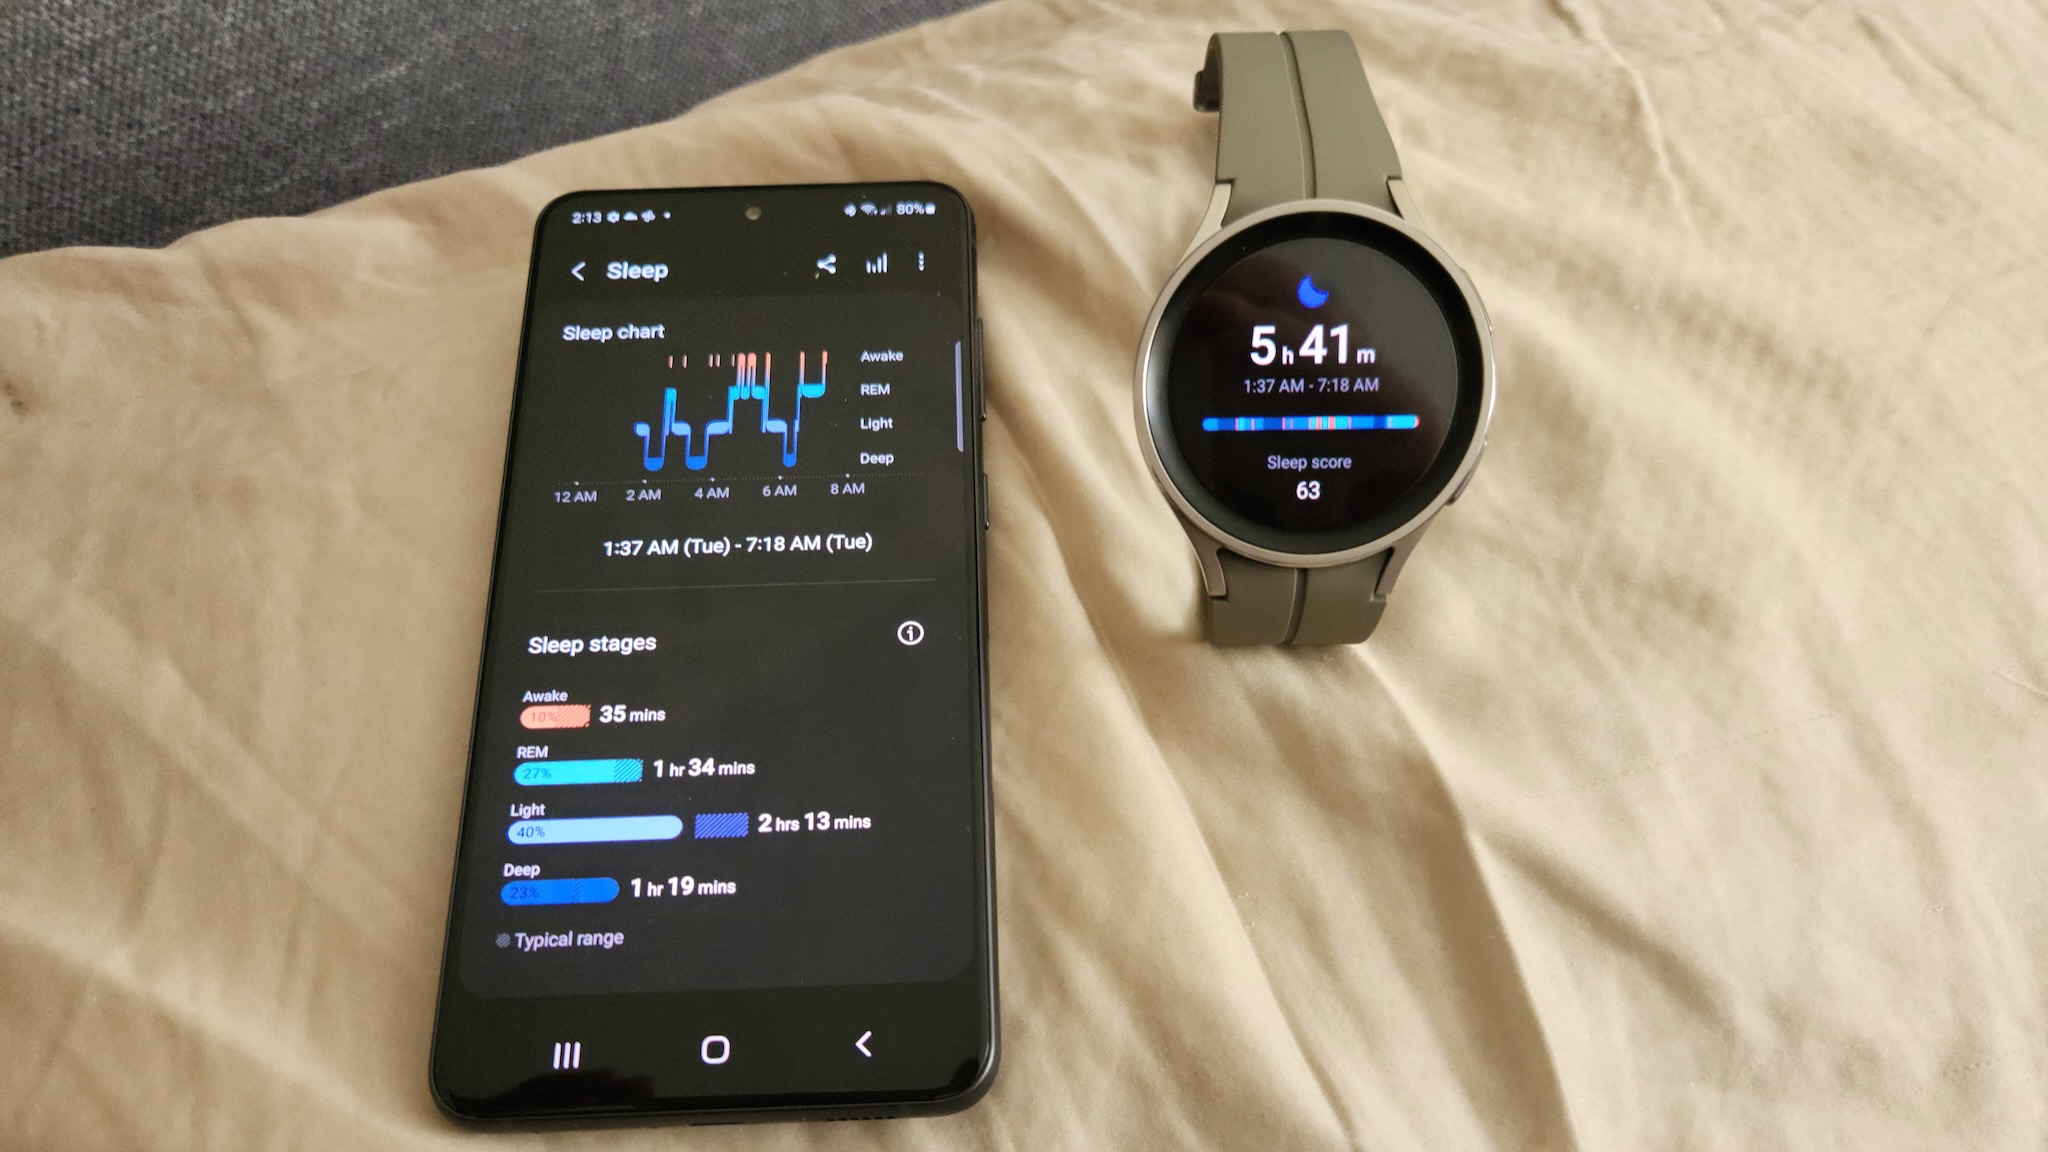 The Samsung Galaxy S21 FE and Samsung Galaxy Watch 5 Pro sitting on a pillow, showing sleep tracking results.